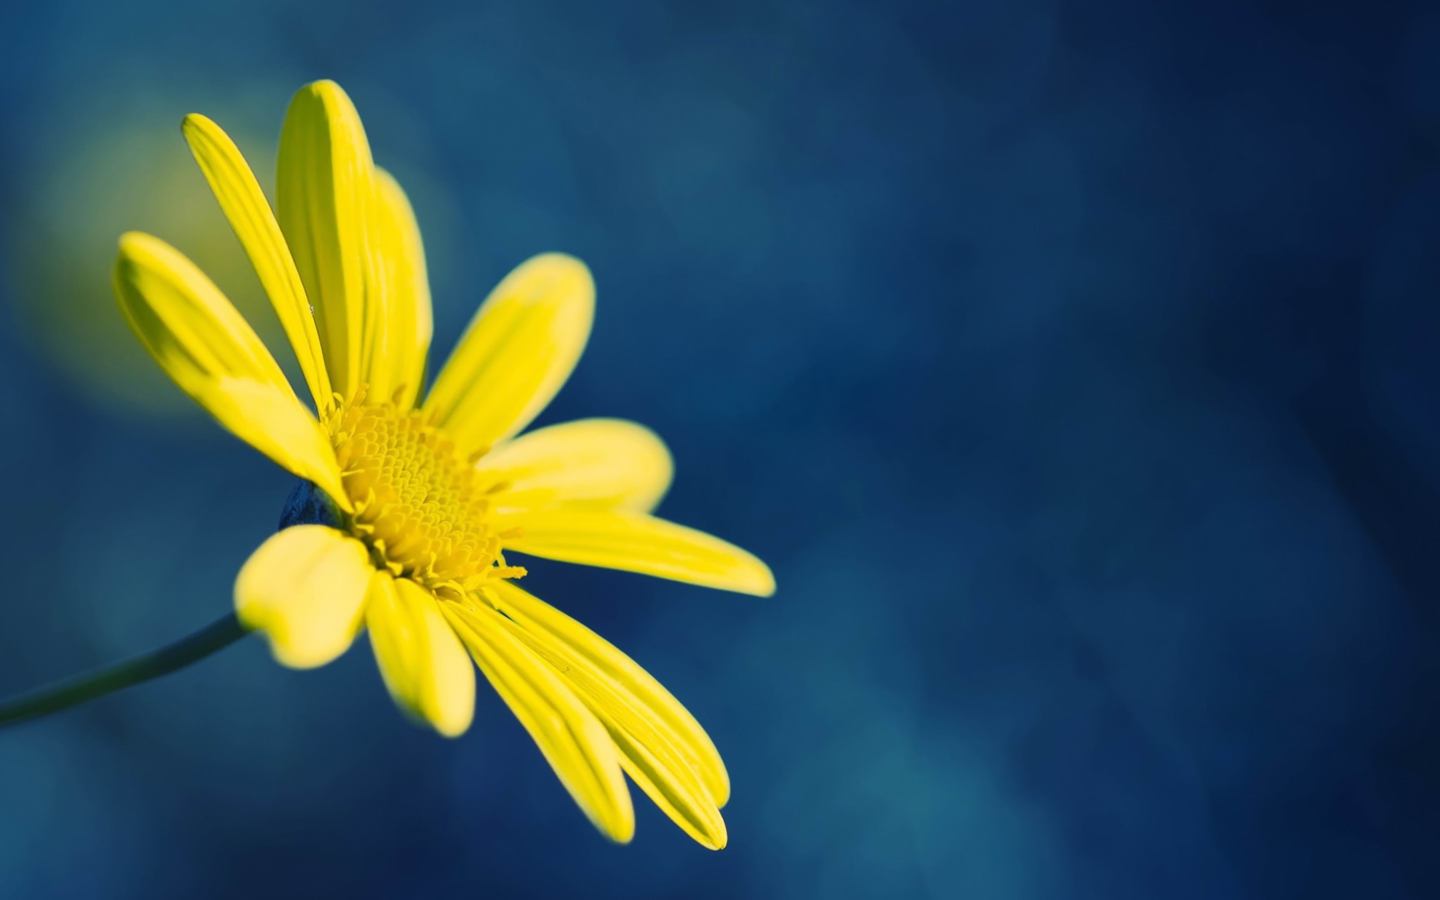 Yellow Flower On Blue Background wallpaper 1440x900